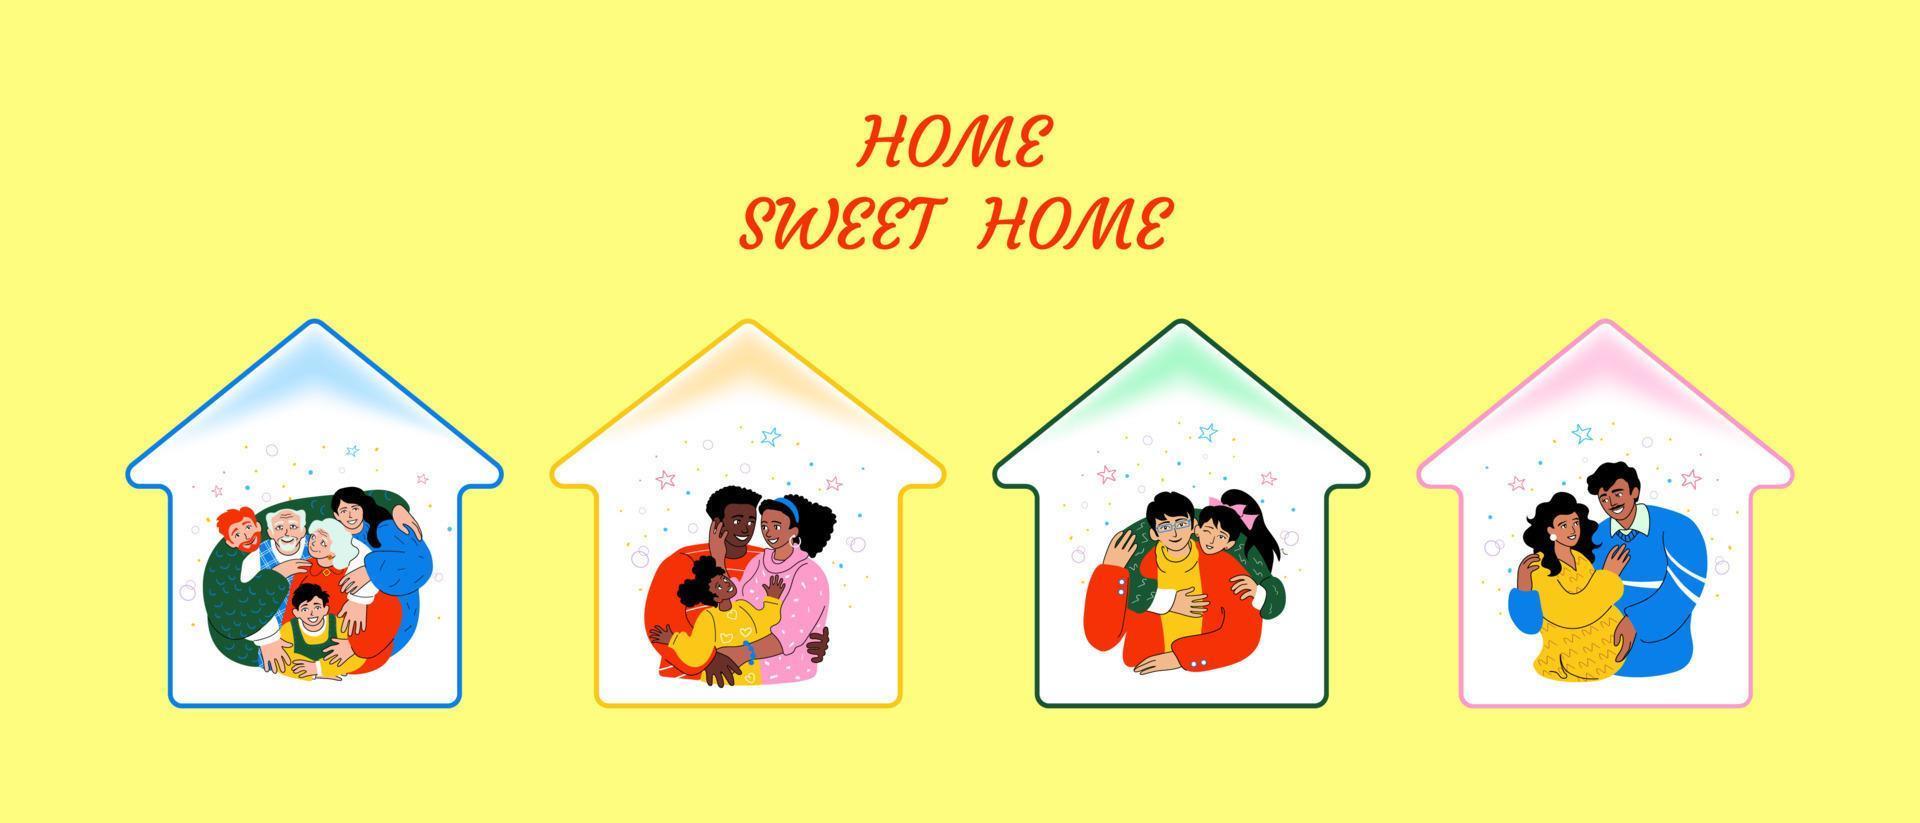 Four happy families hugging. Latin American, African American, Caucasian, Asian. Parenthood and pregnancy, warm home and love concept. Elderly and young people together. Doodle style illustration vector